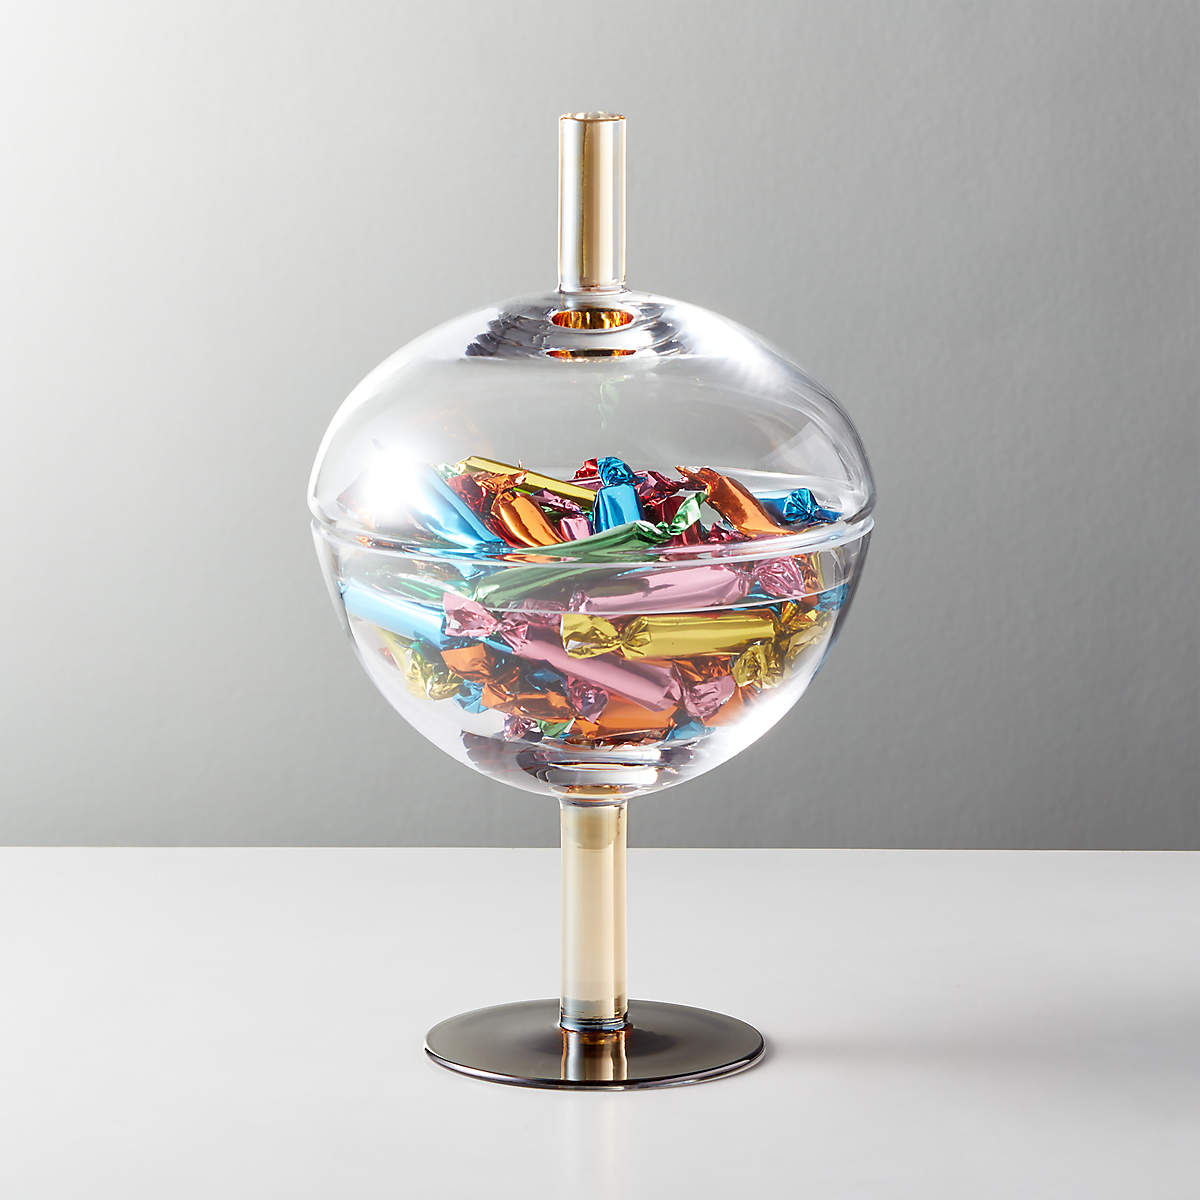 Spherical candy dish with gold stand and handle on lid